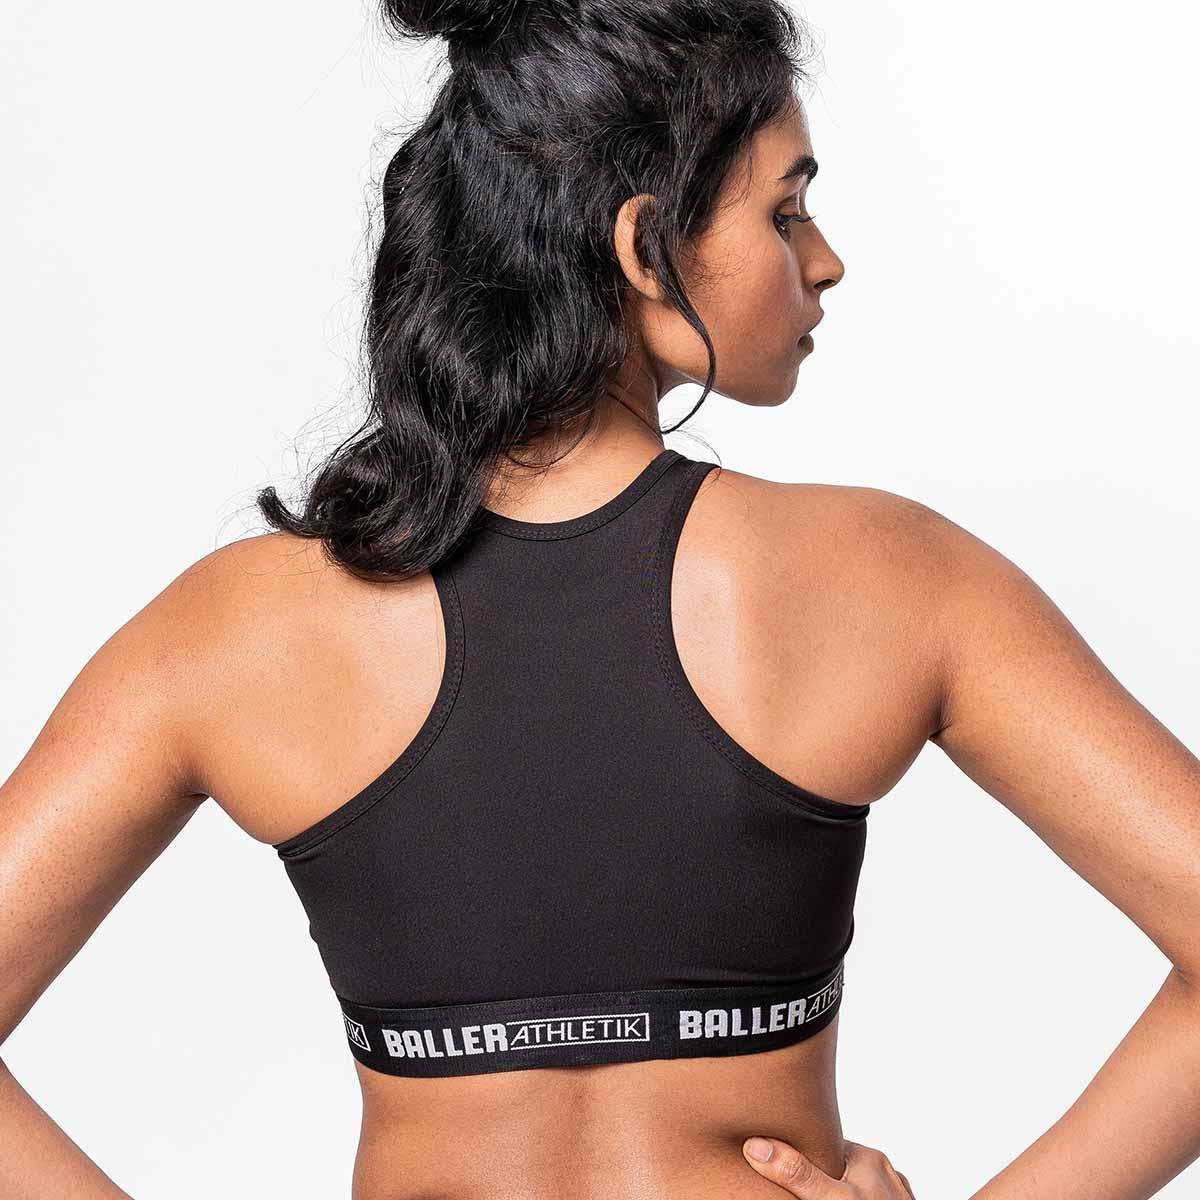 Crossover Sports Bra - Removable Pads - Coal